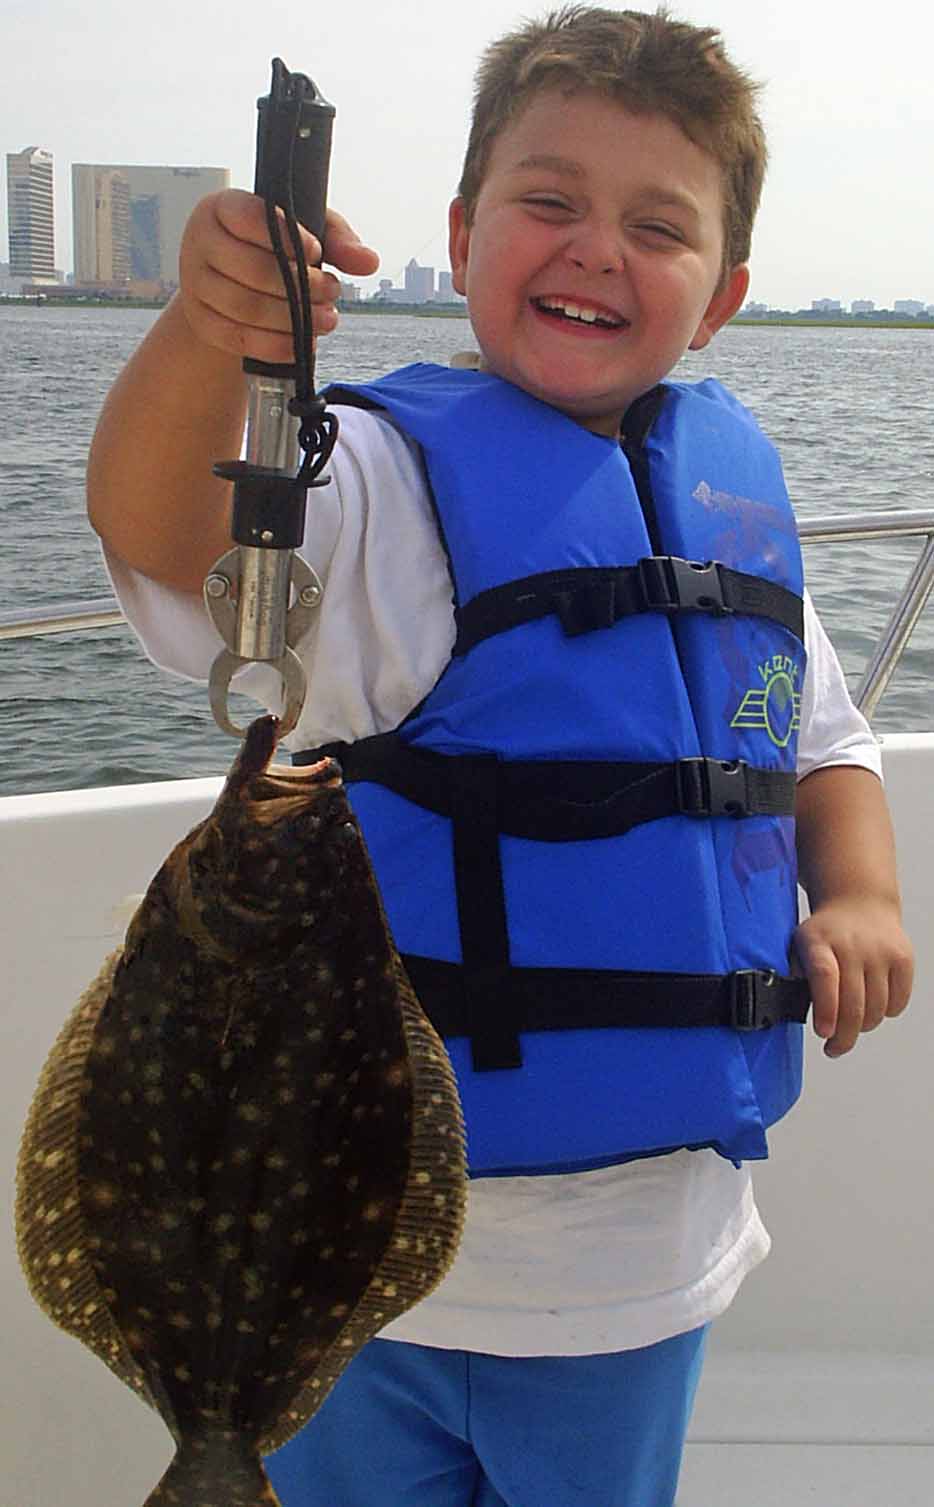 Have a blast fishing for flounder, stirped bass, sharks, blues and weakfish!